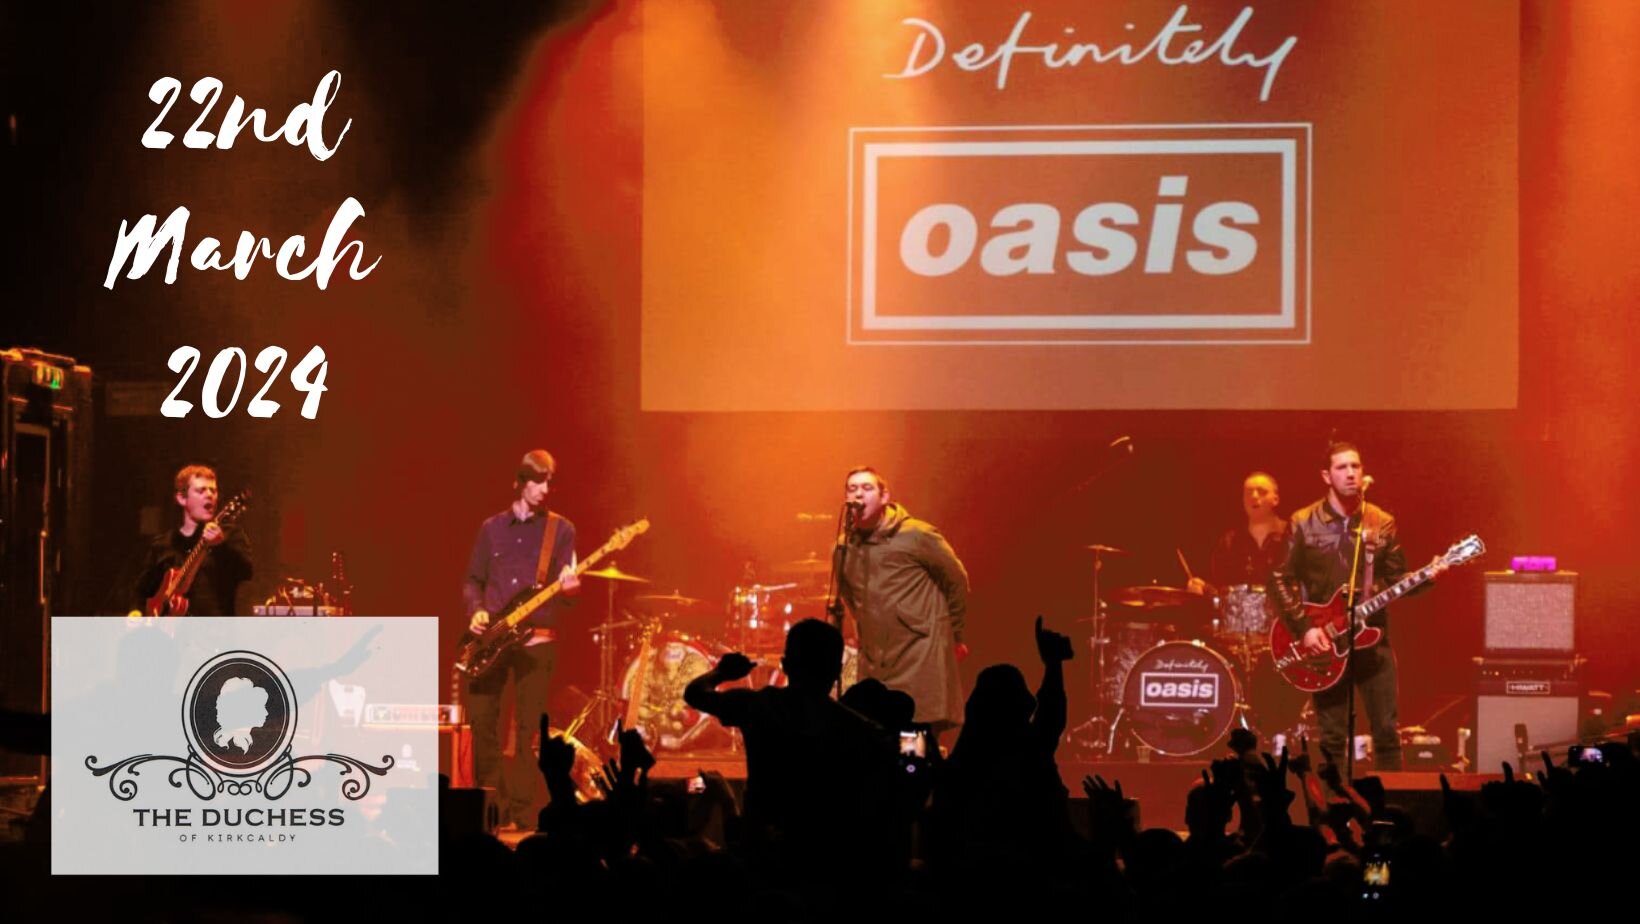 Definitely Oasis | 22nd March